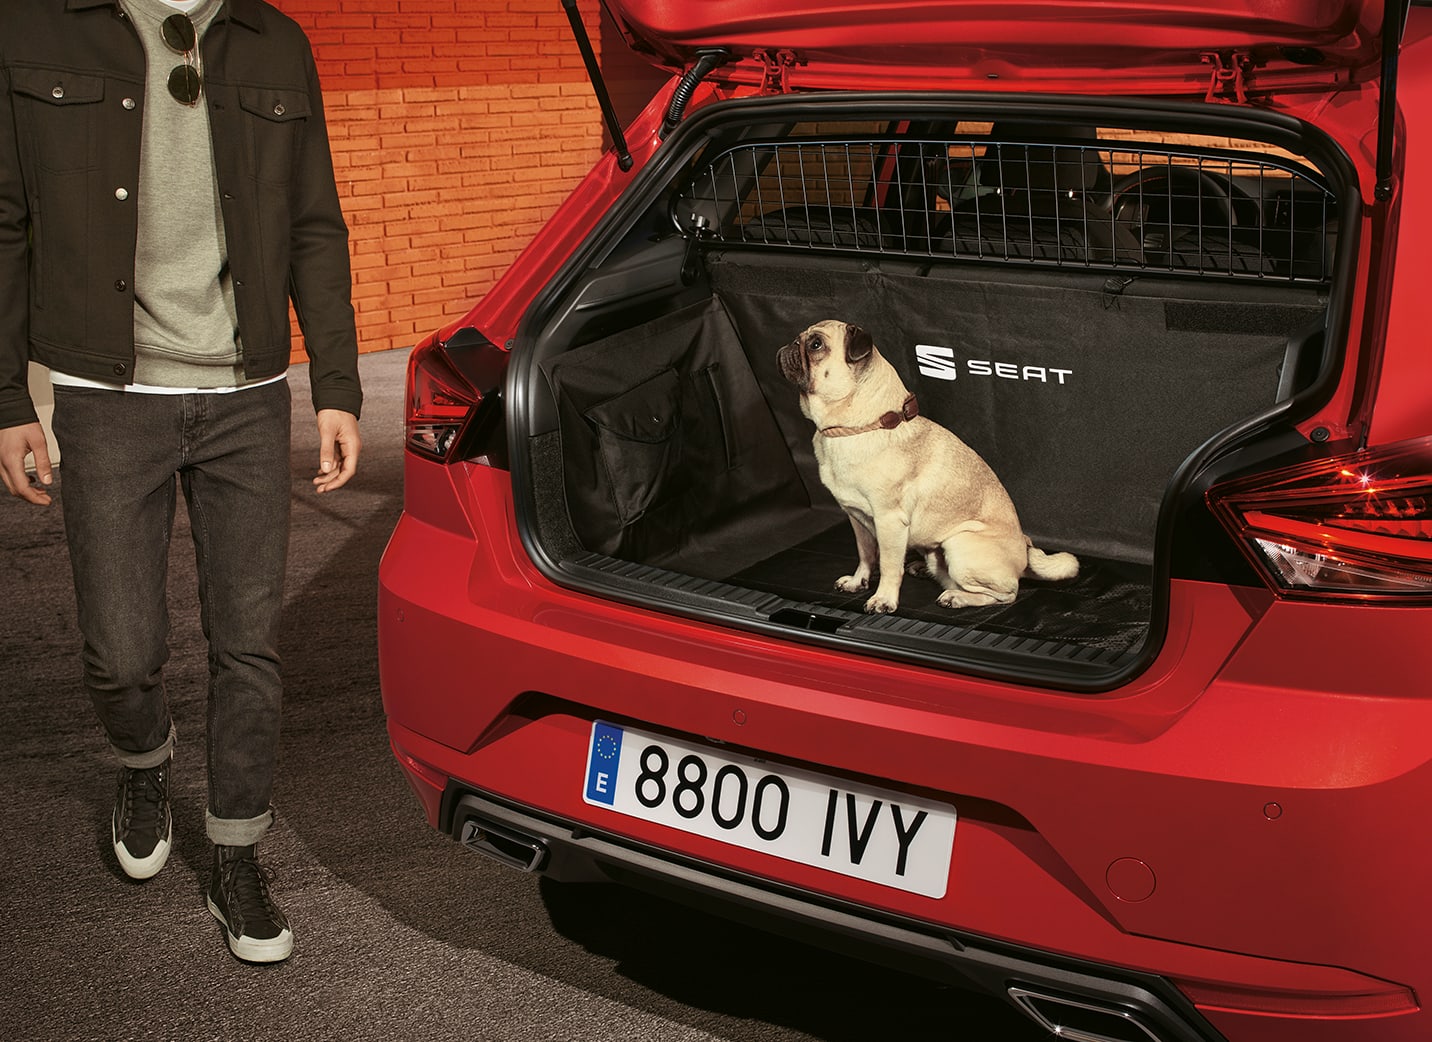 separation-grill-of-a-seat-ibiza-with-a-dog